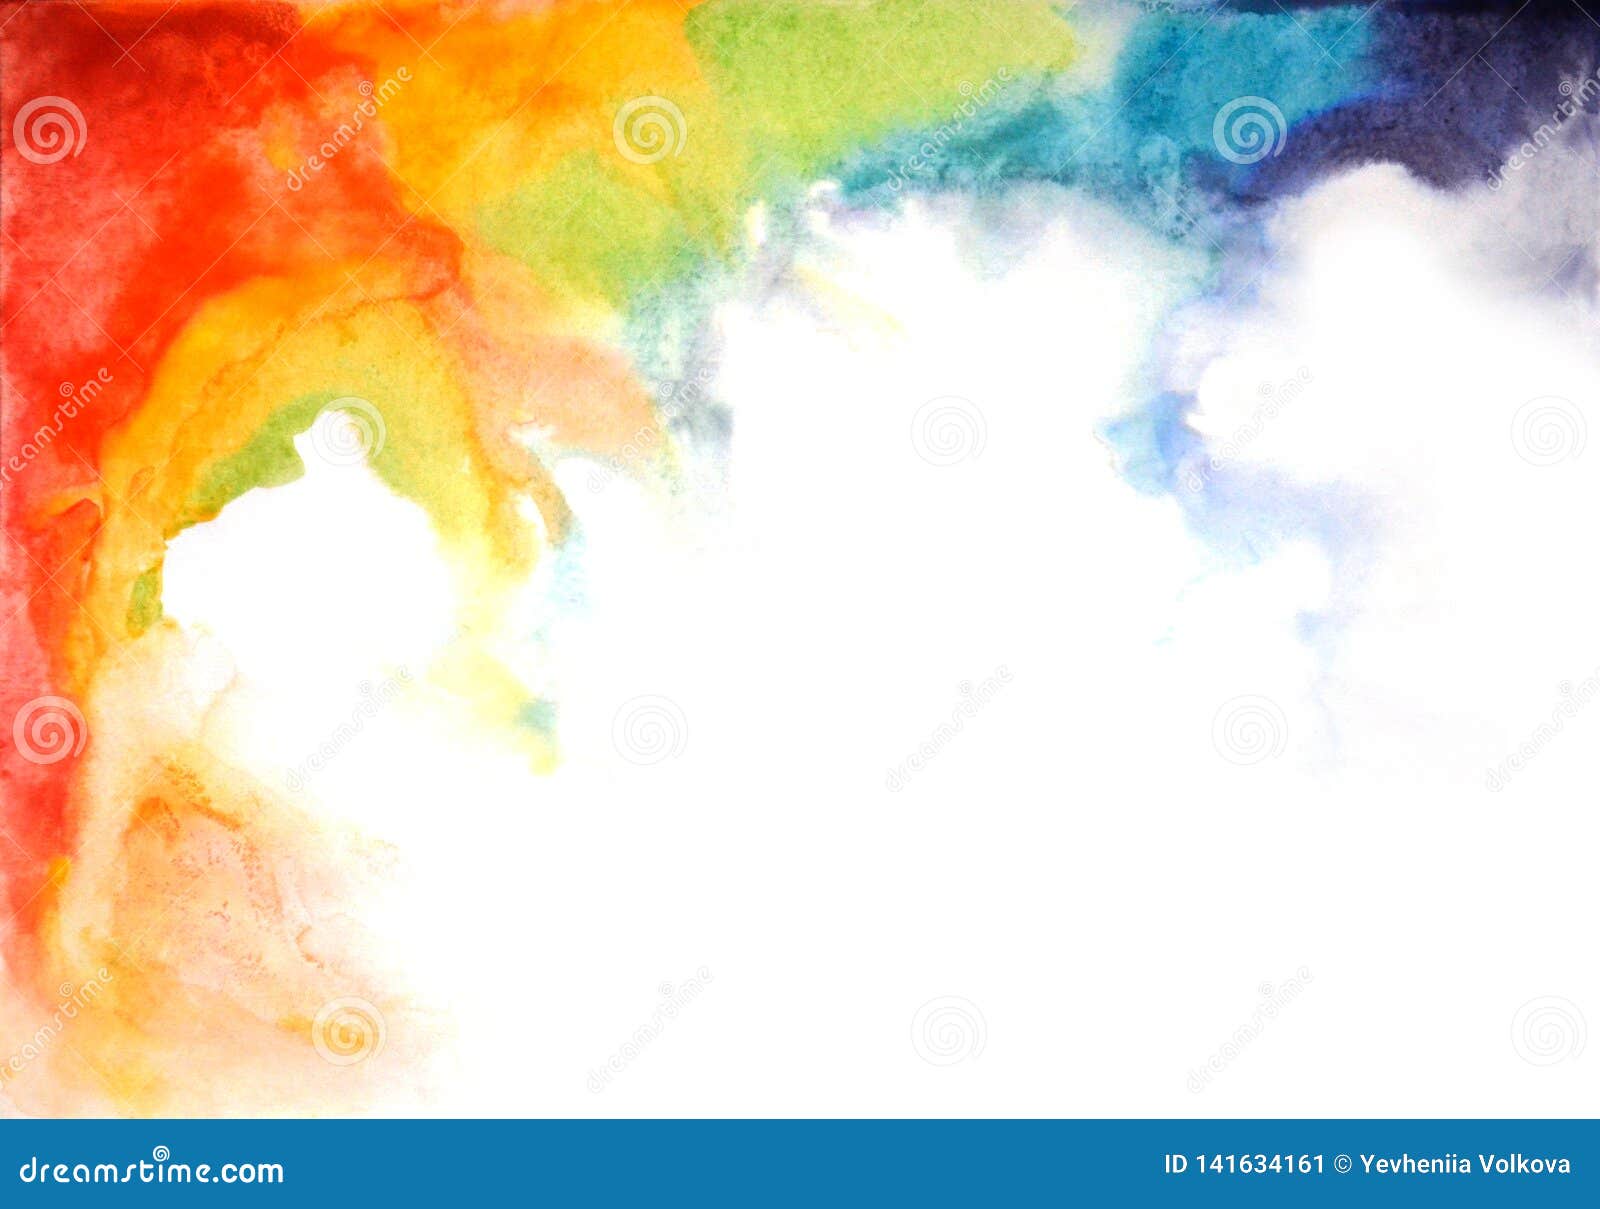 Abstract Acrylic and Watercolor Brush Strokes Painted Background. Frame,  Grunge Stock Image - Image of artistic, conservation: 141634161